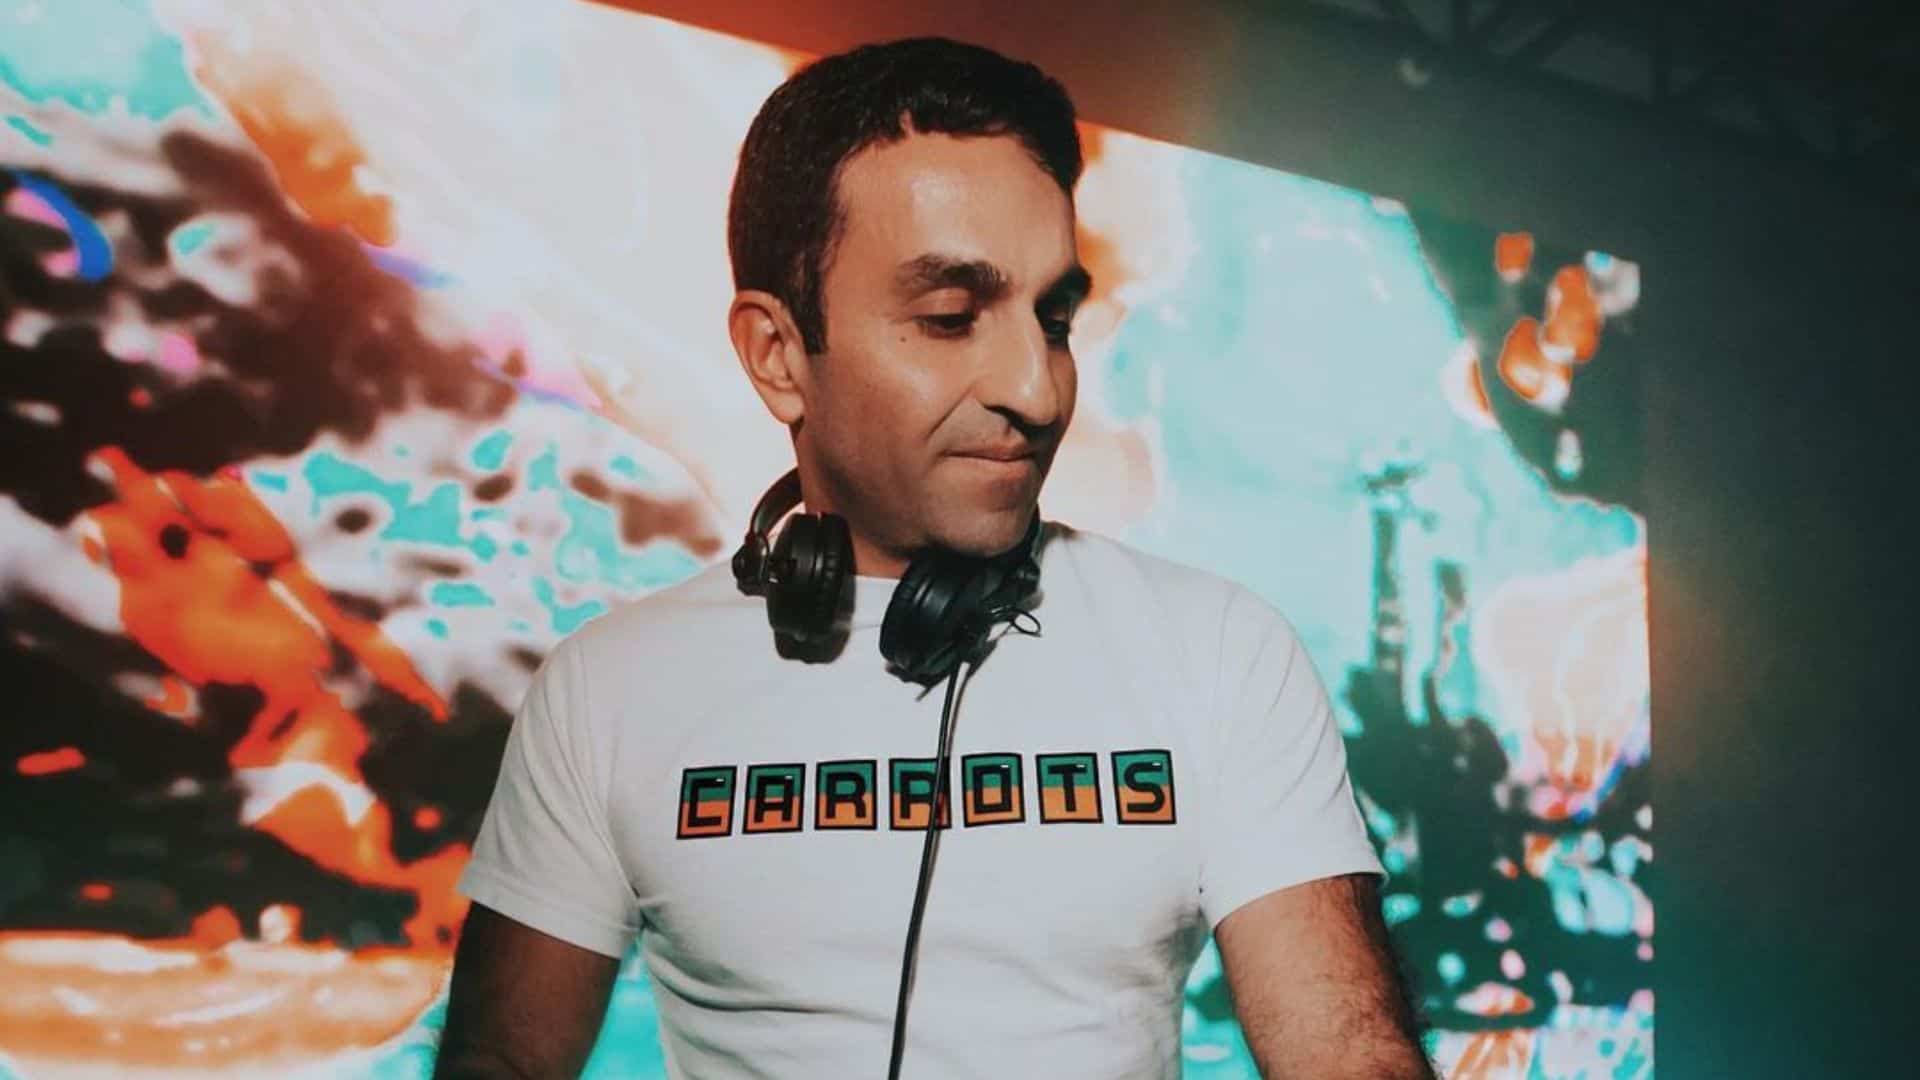 Arman discusses main inspirations, latest release ‘Express’ and more: Interview